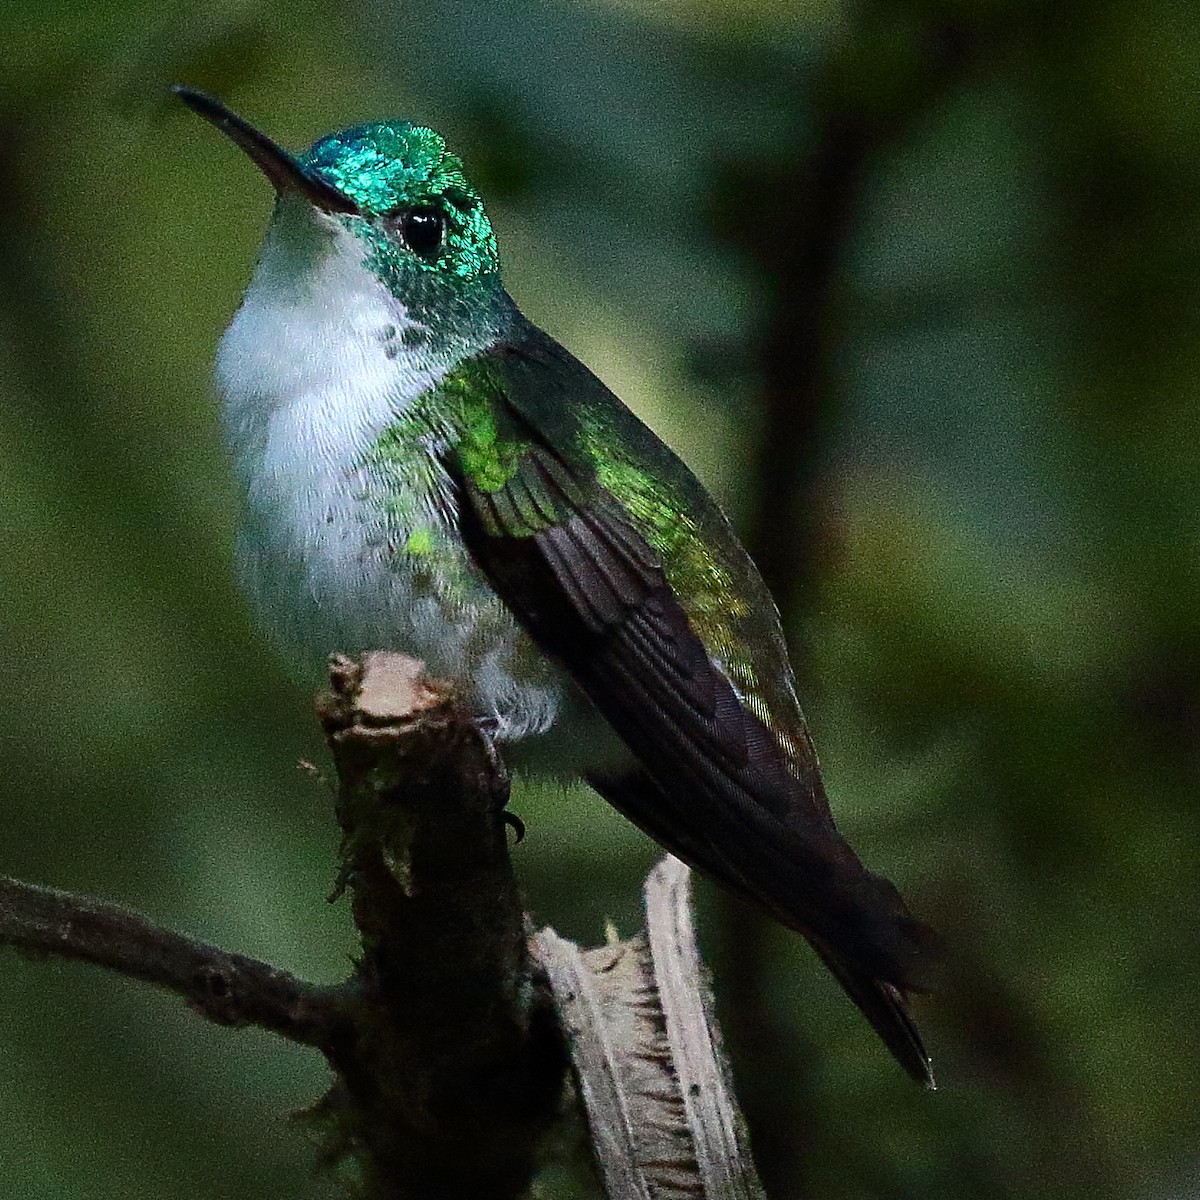 Andean Emerald - Ryan Candee